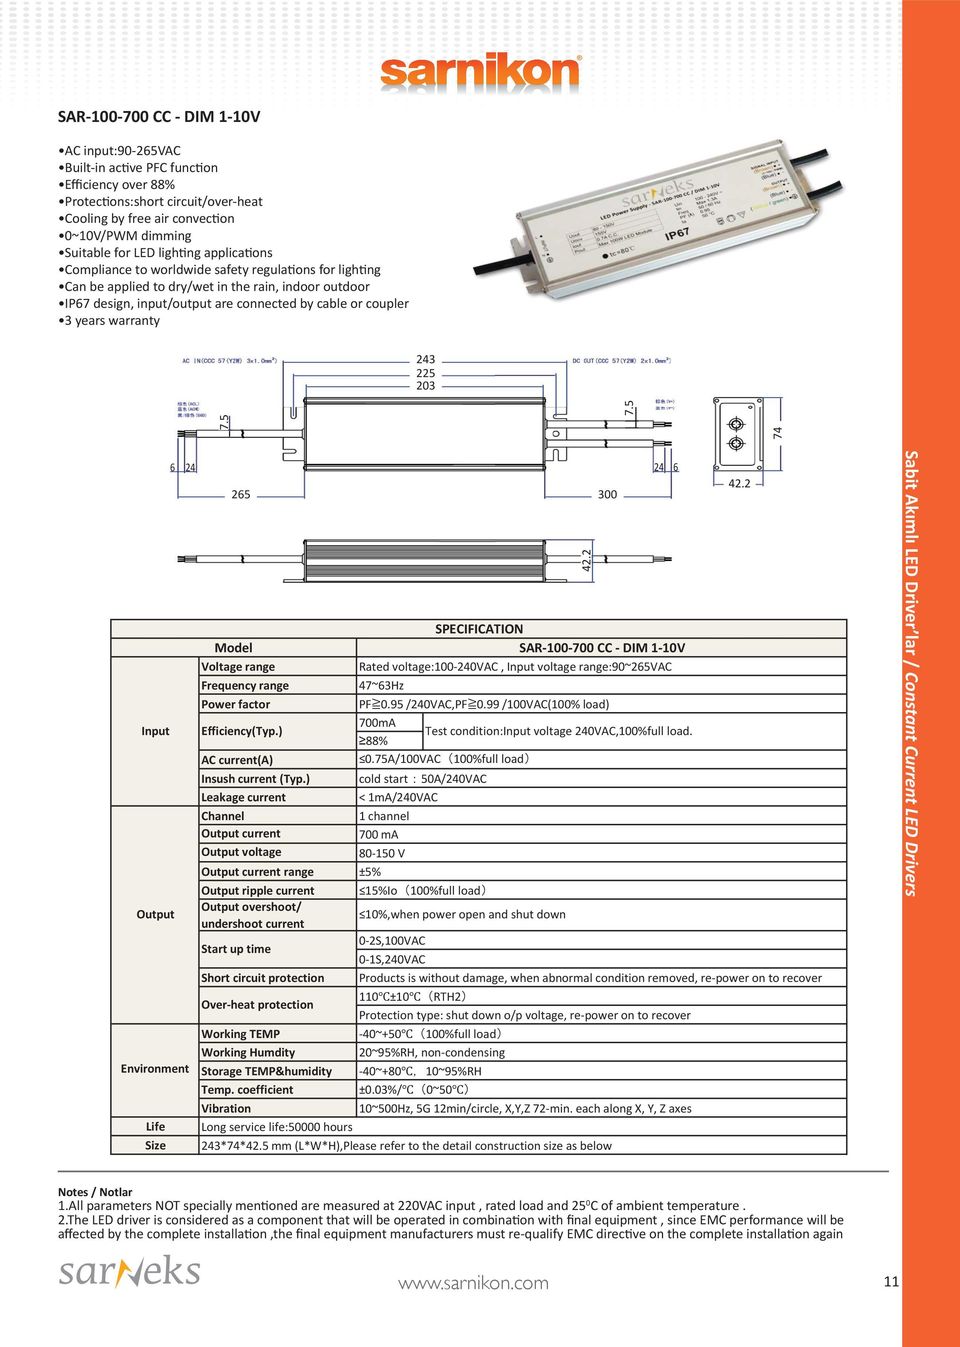 warranty 243 225 203 74 Input Life Size 6 Output Environment 24 24 6 265 Model Voltage range Frequency range Power factor Efficiency(Typ.) AC current(a) Insush current (Typ.